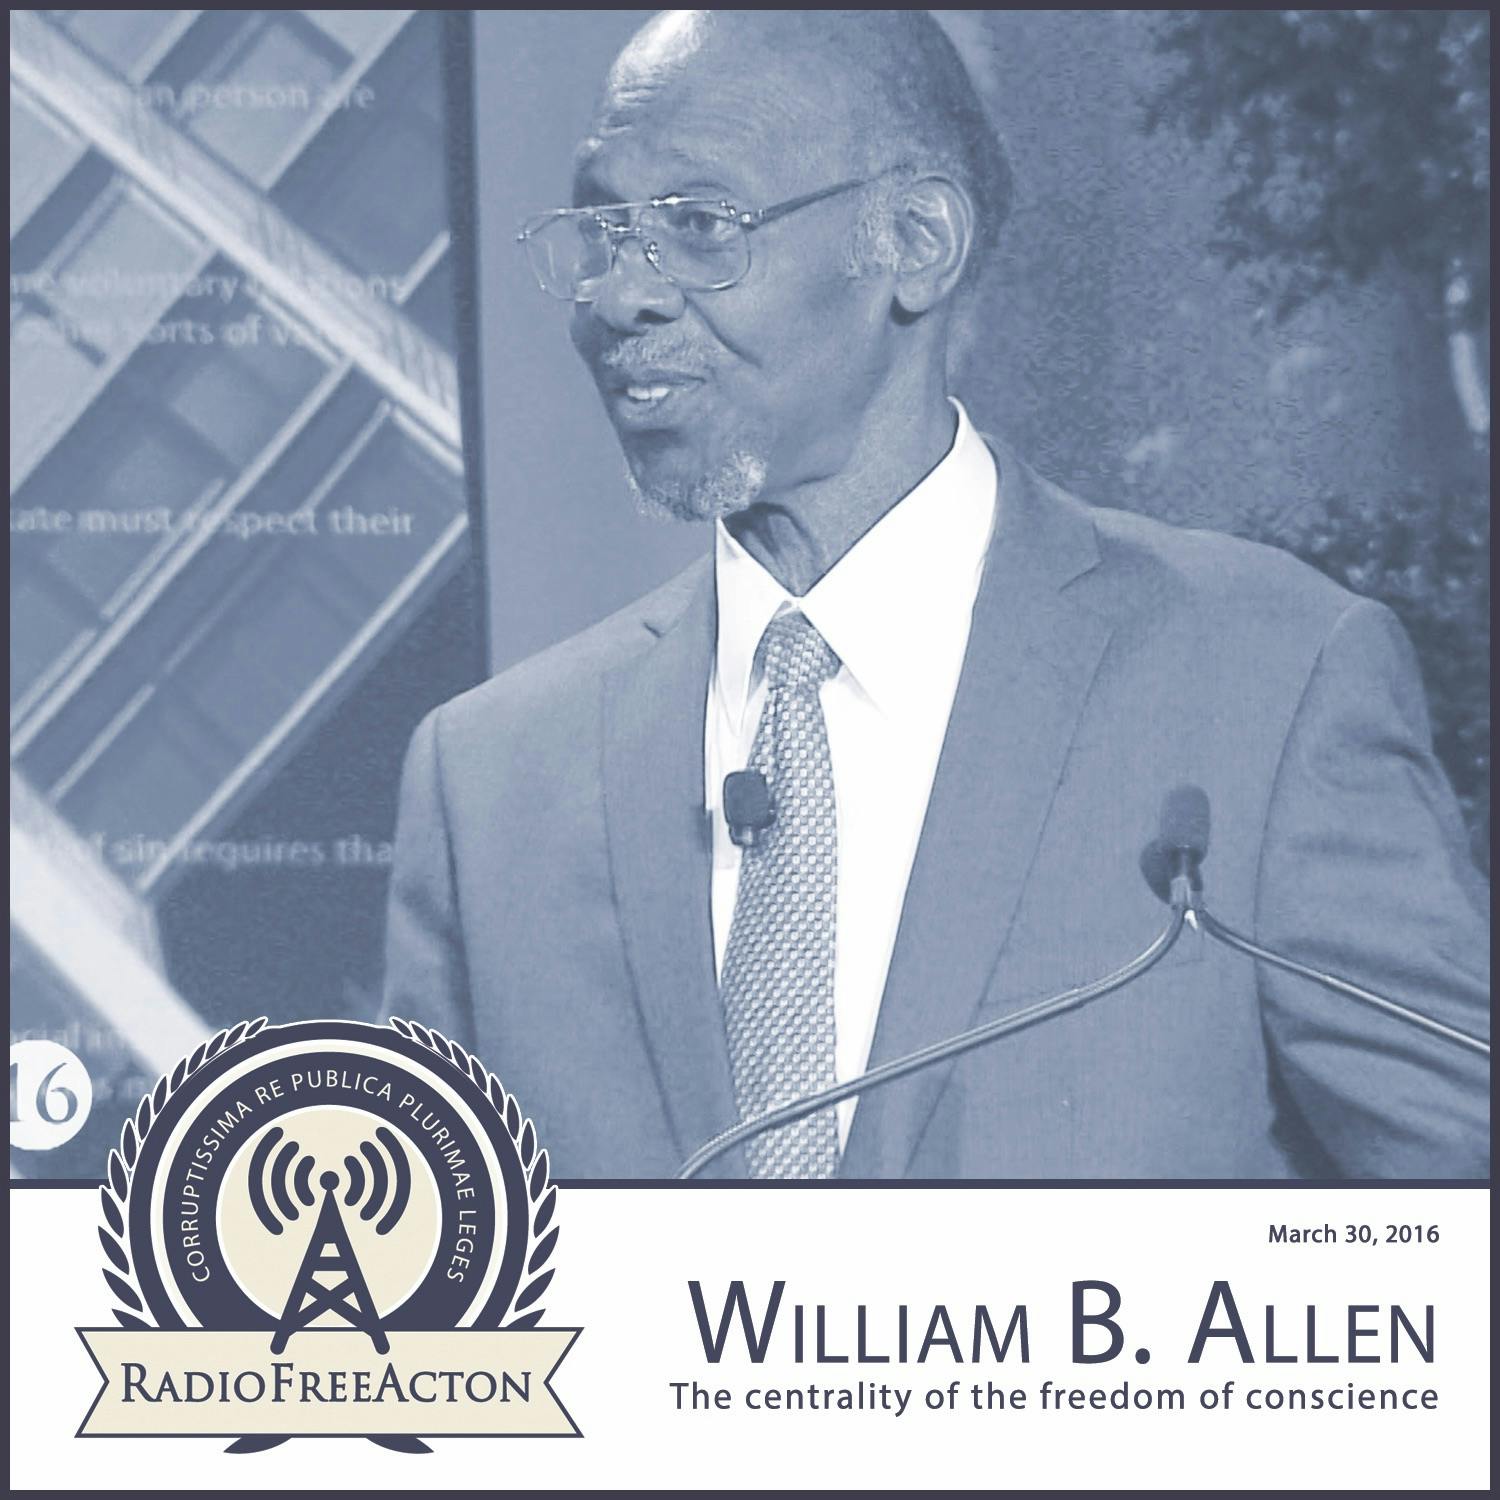 William Allen on Conscience and Liberty